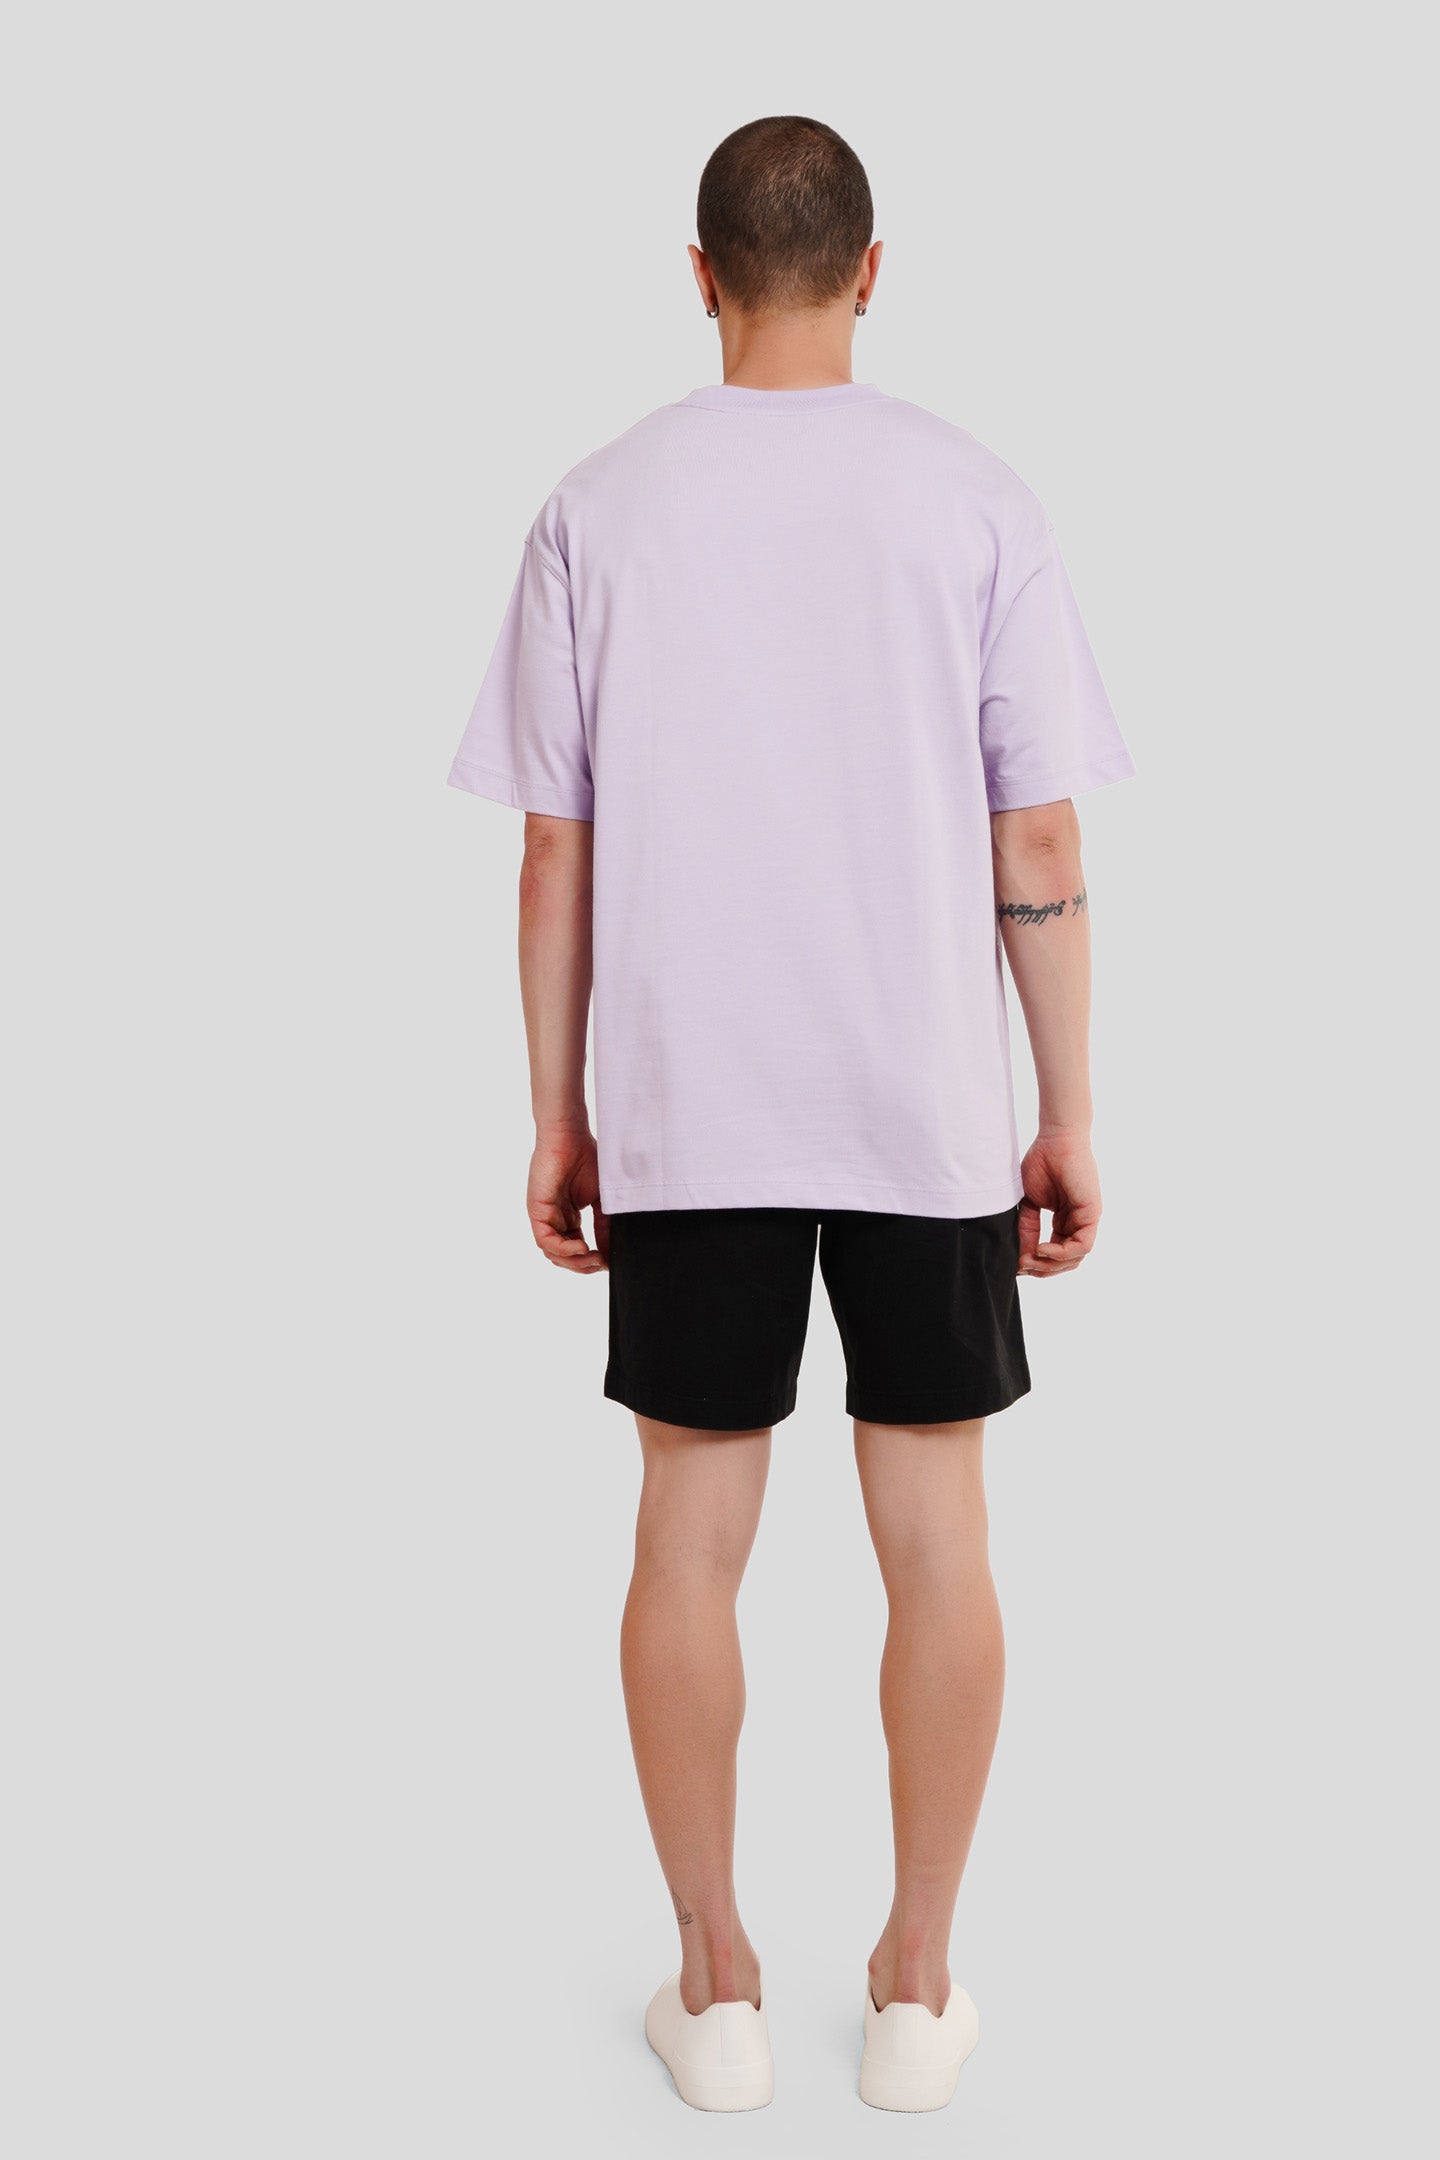 Rocketo Lilac Printed T Shirt Men Oversized Fit With Front Design Pic 4